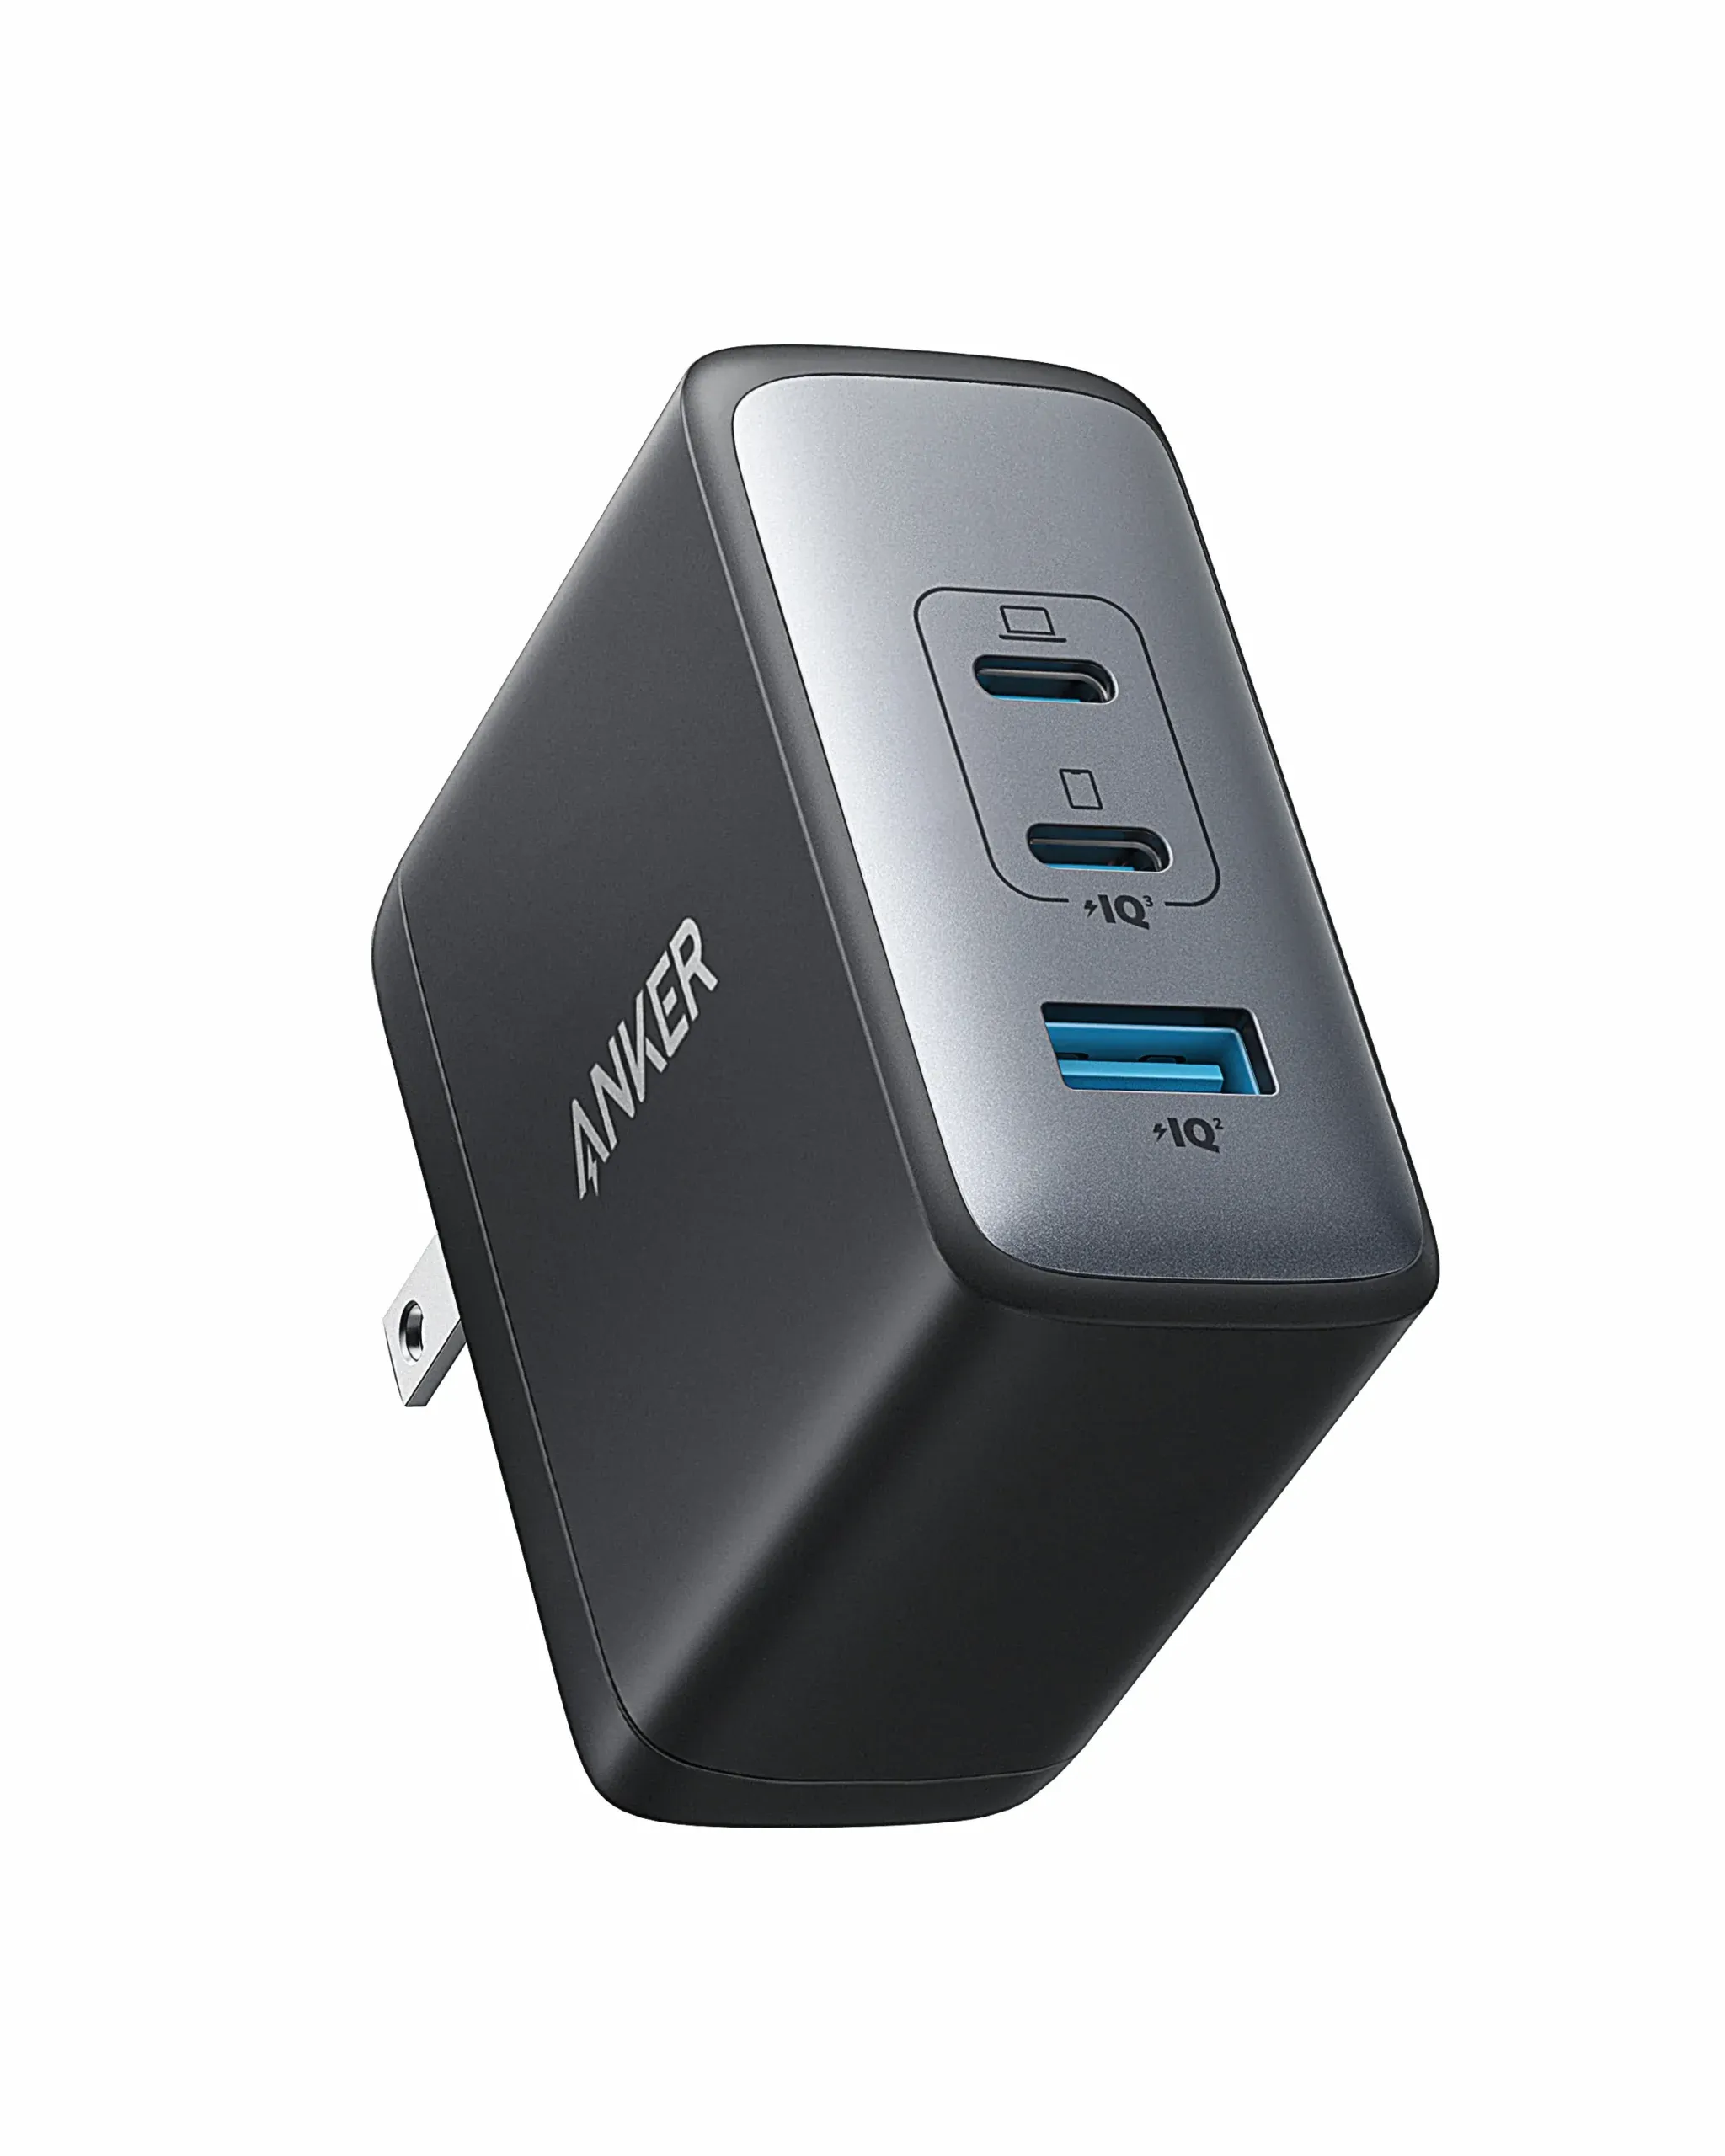 With 100W and three ports, this Anker charger can charge your laptop, phone, and even a smartwatch at the same time.